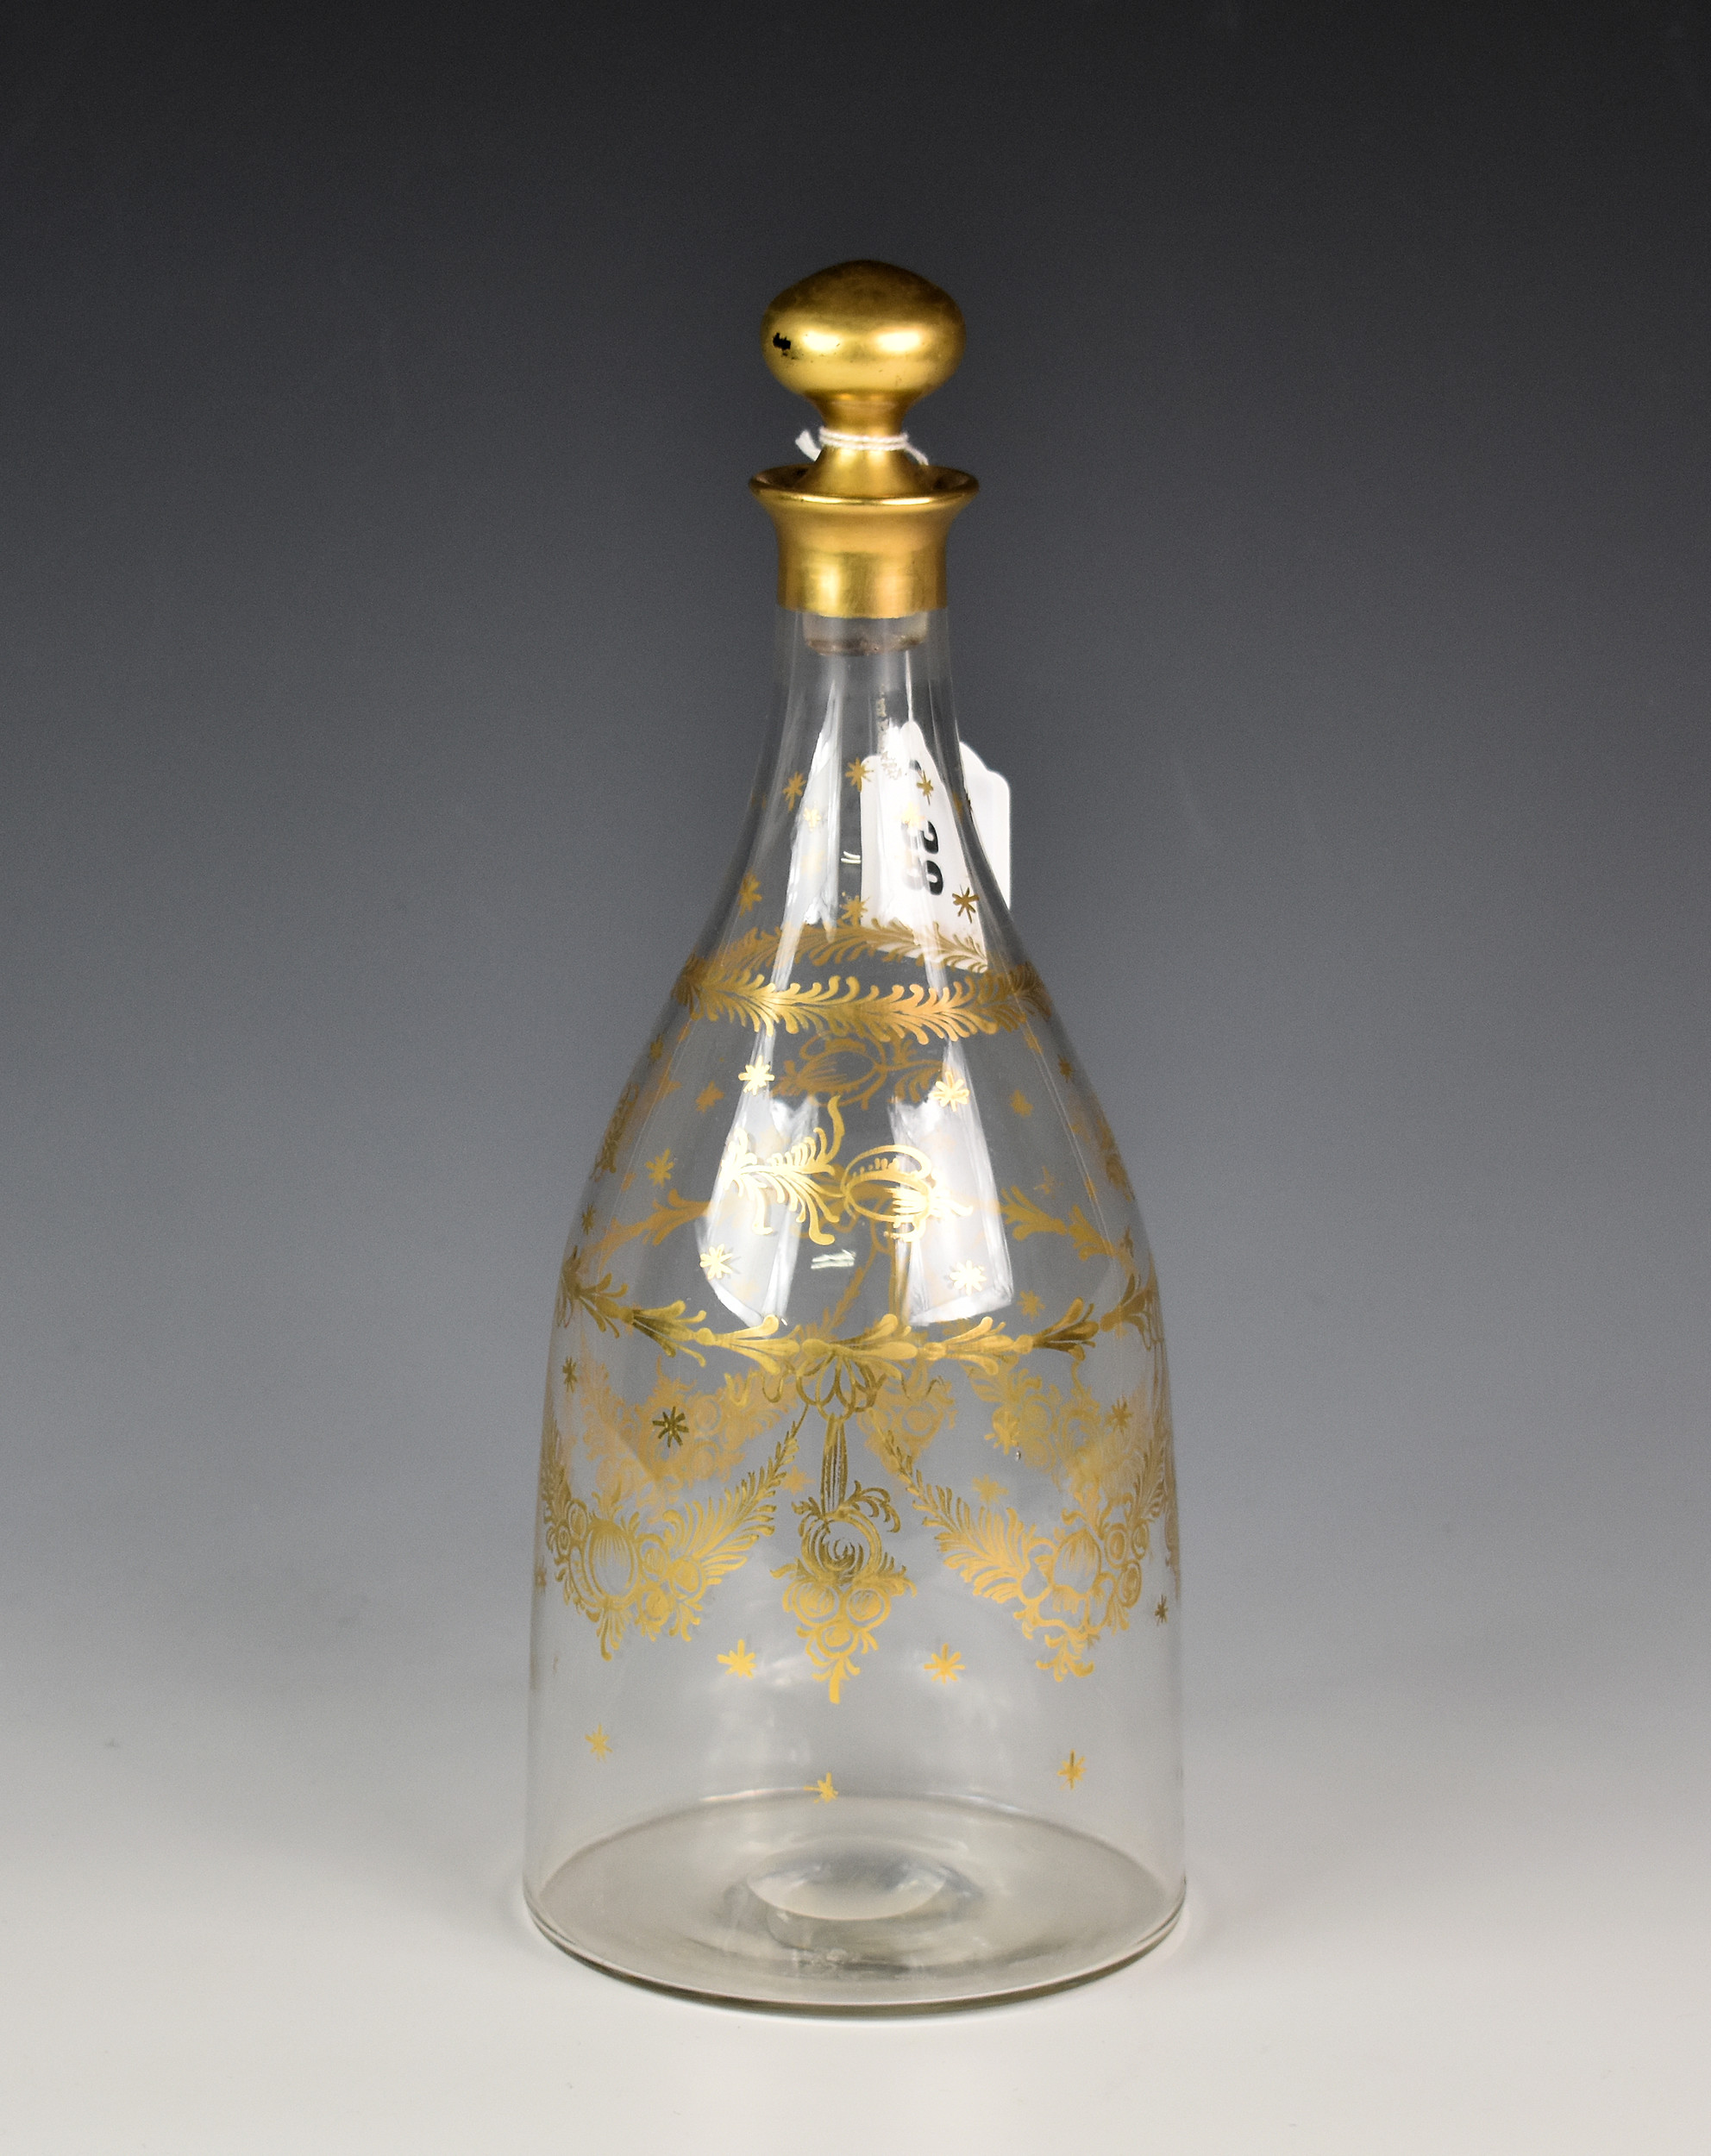 A Victorian hand-blown glass decanter with gilt decoration., 11«in. (29.2cm) high.